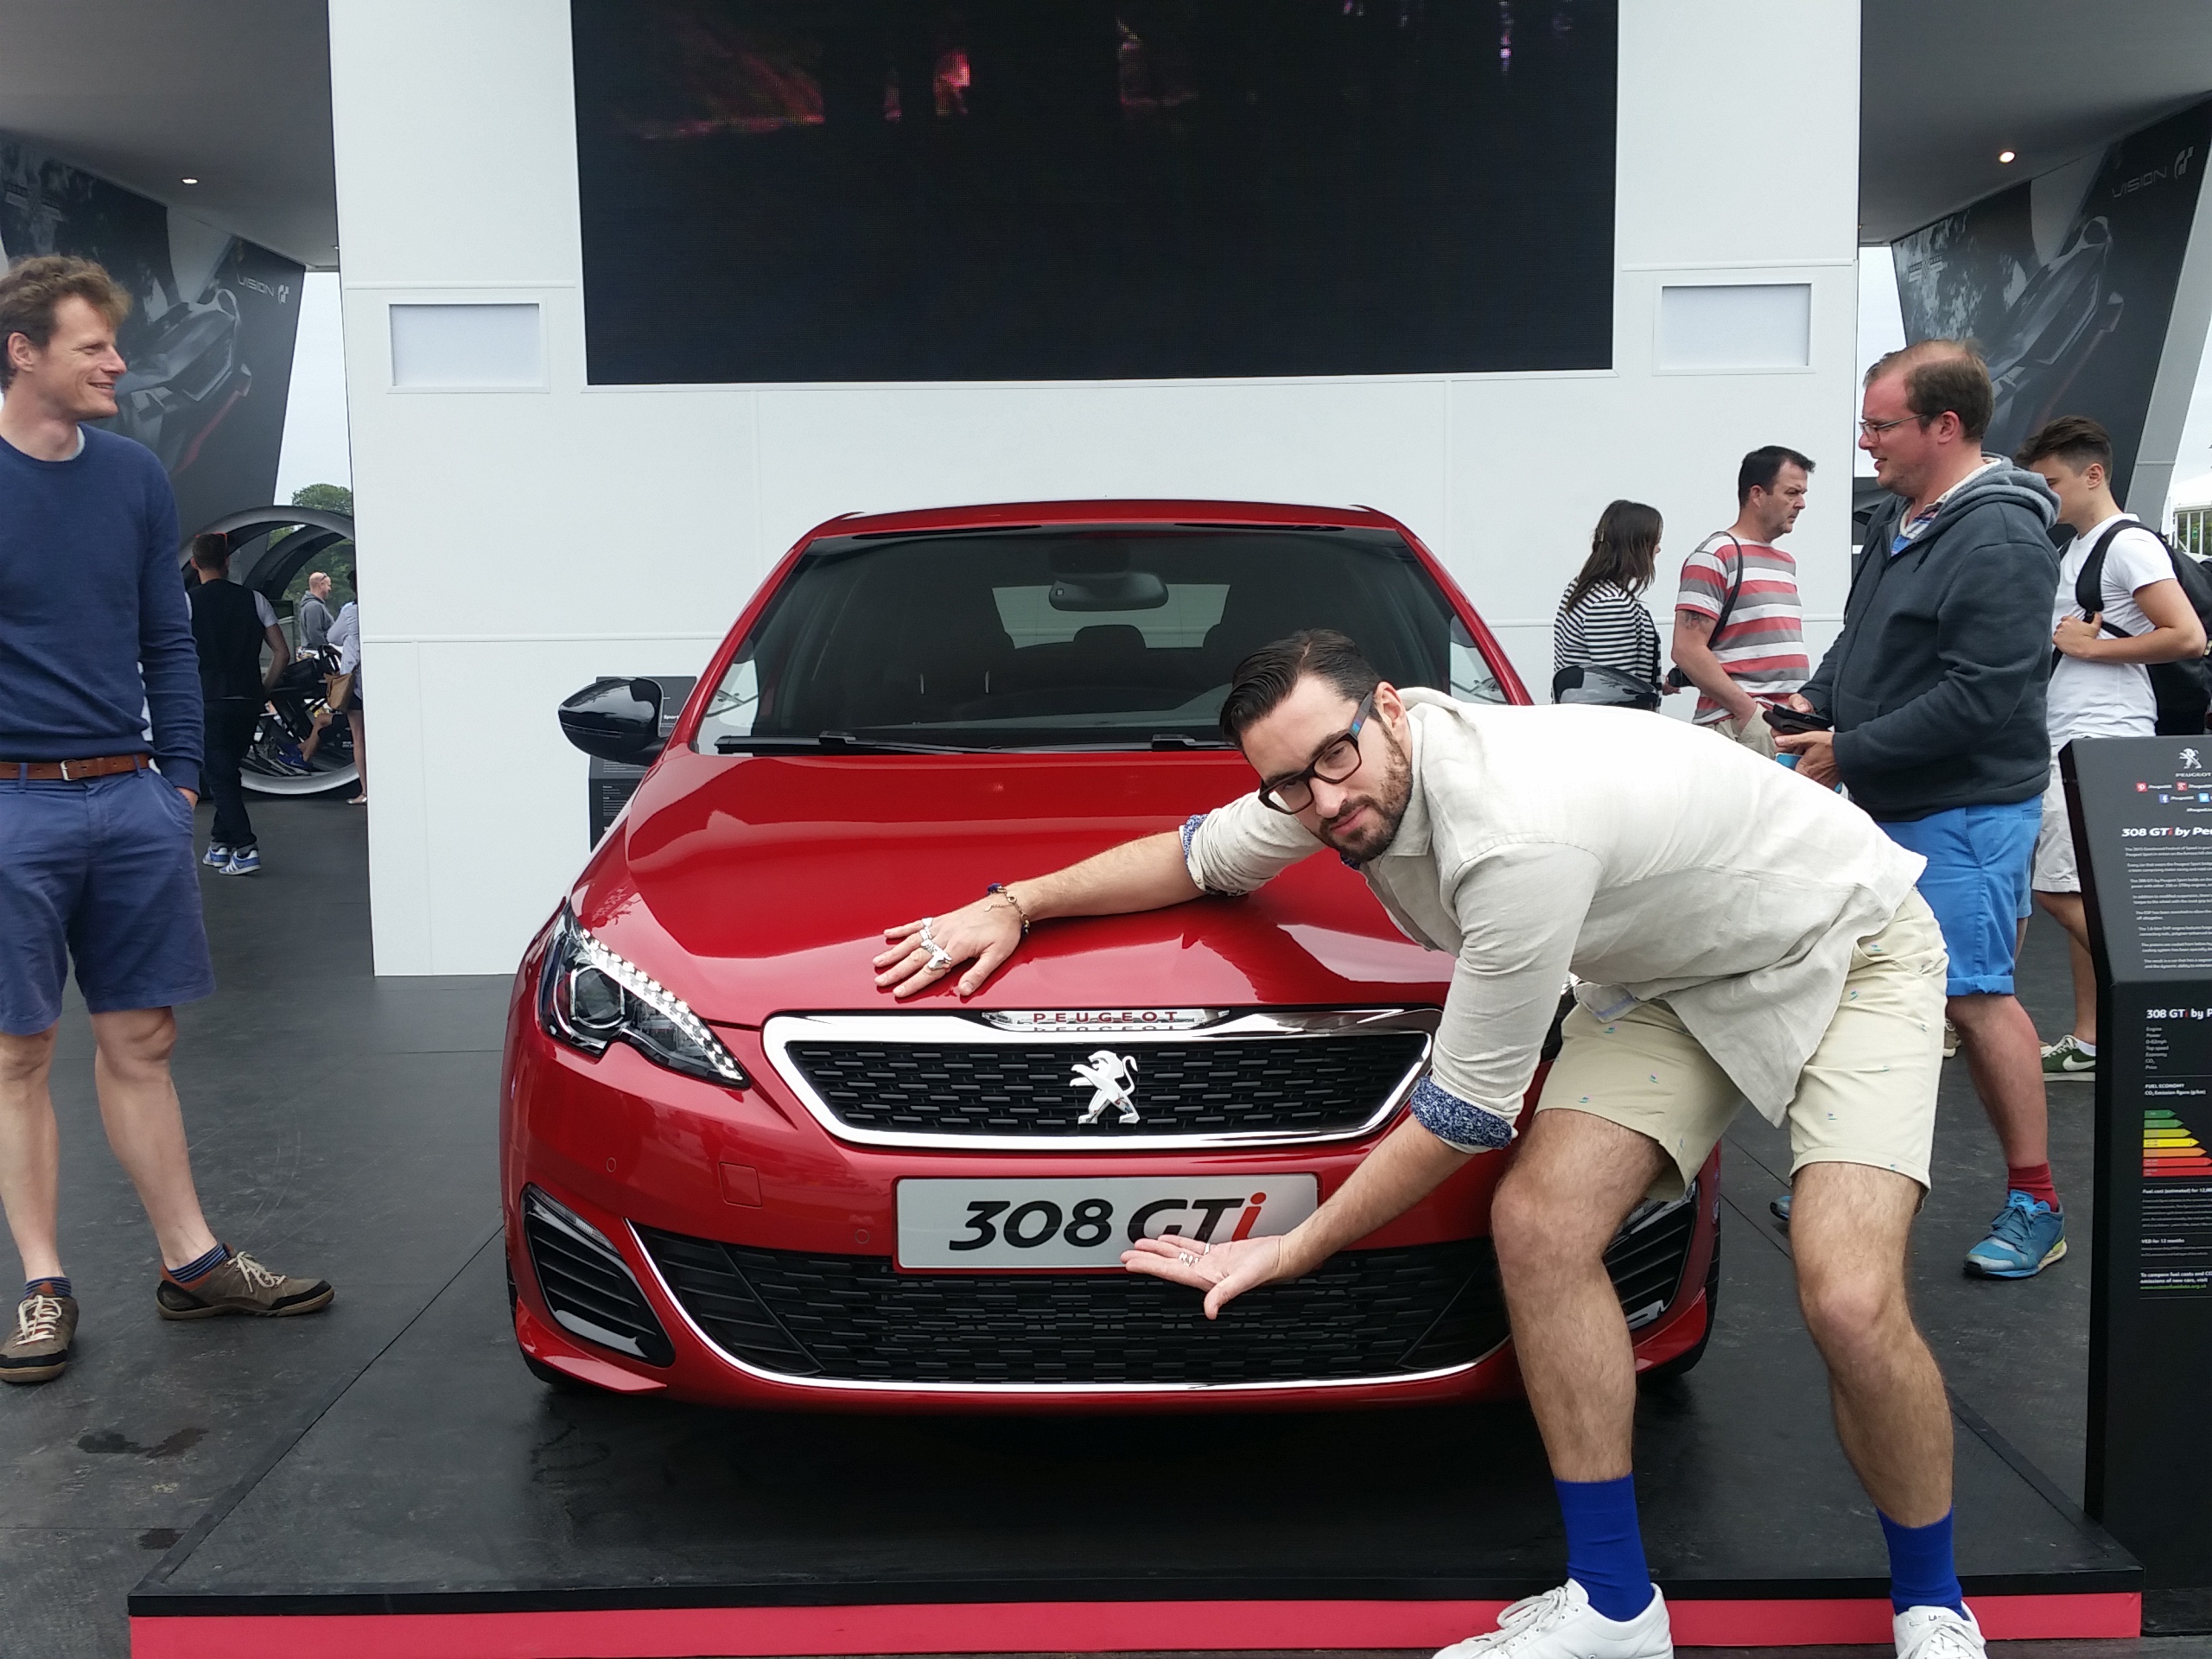 Goodwood Festival of Speed 2015 with Peugeot